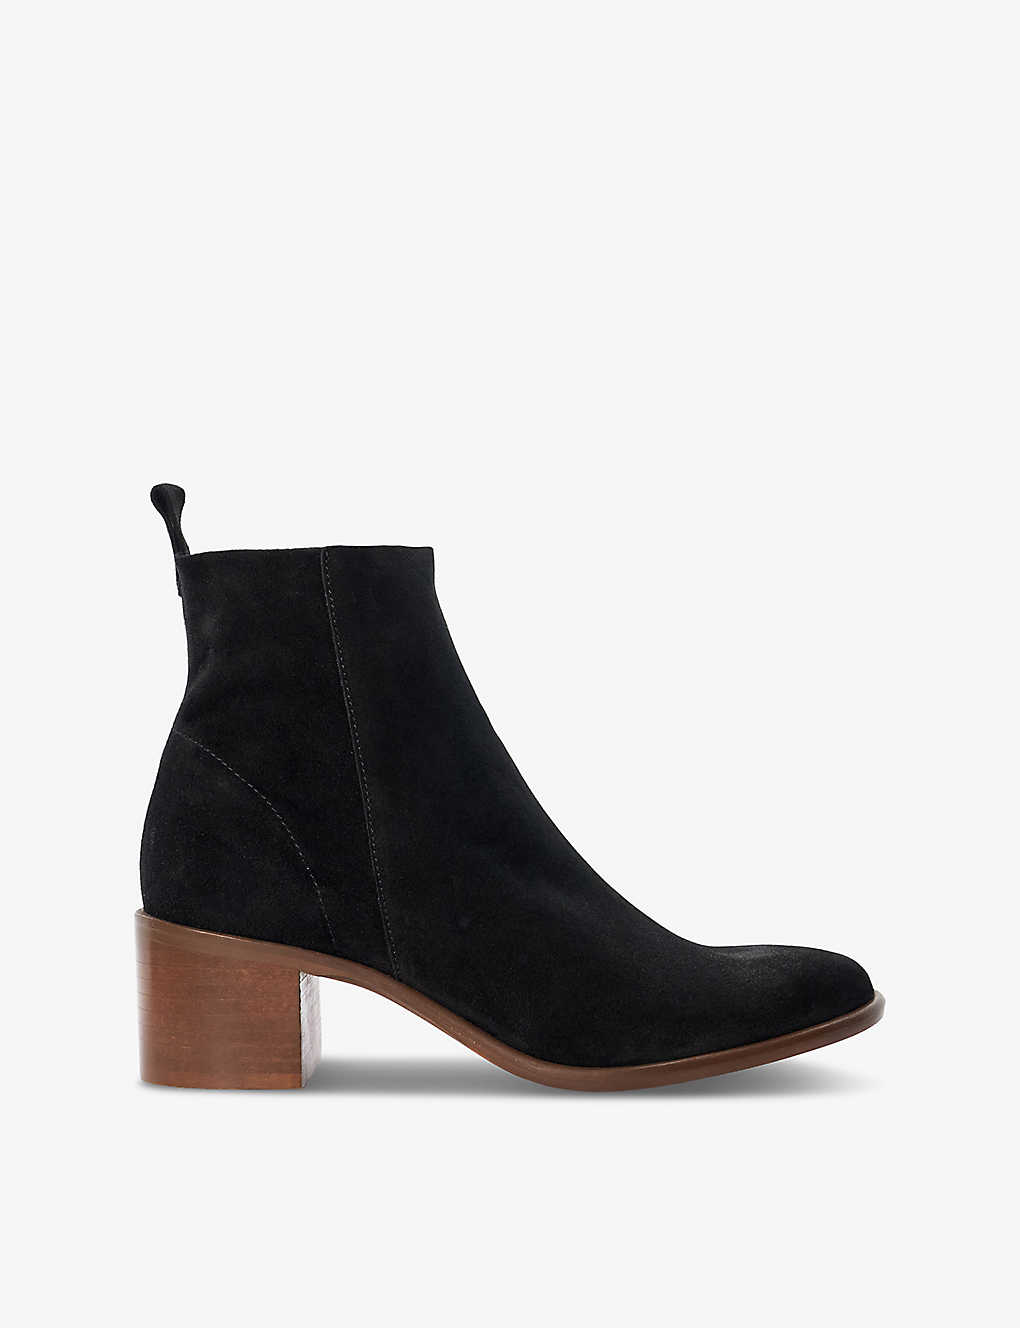 Dune Mens Black-suede Heeled Almond-toe Suede Ankle Boots